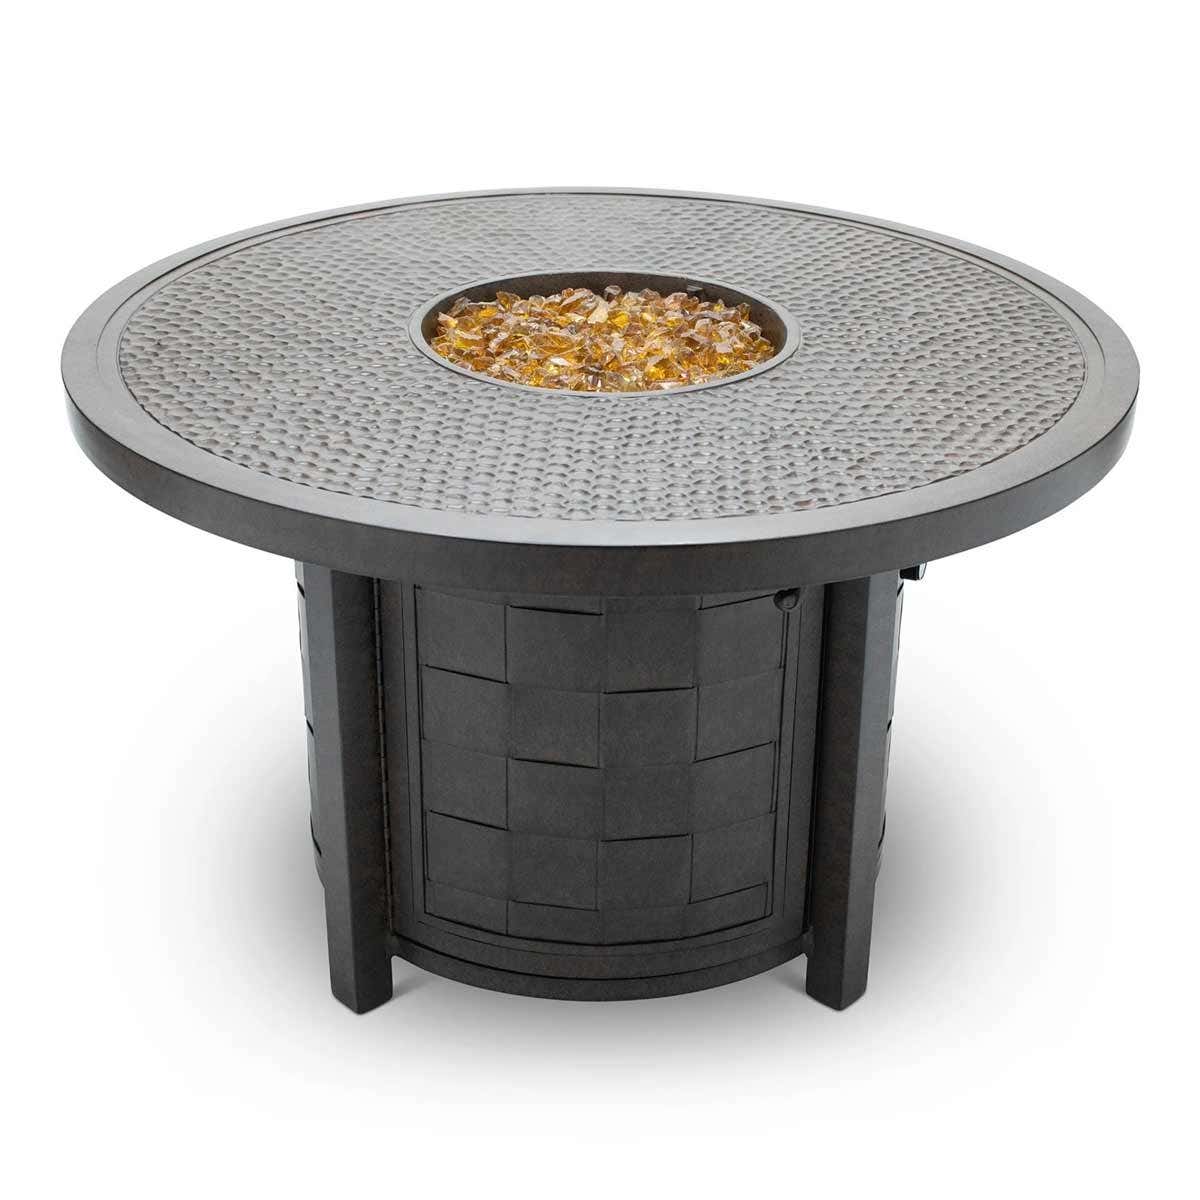 Castelle Classical 40 inch Round Fire Pit with Forged Top and Antique Dark Rum Finish Fireplaces 12025150